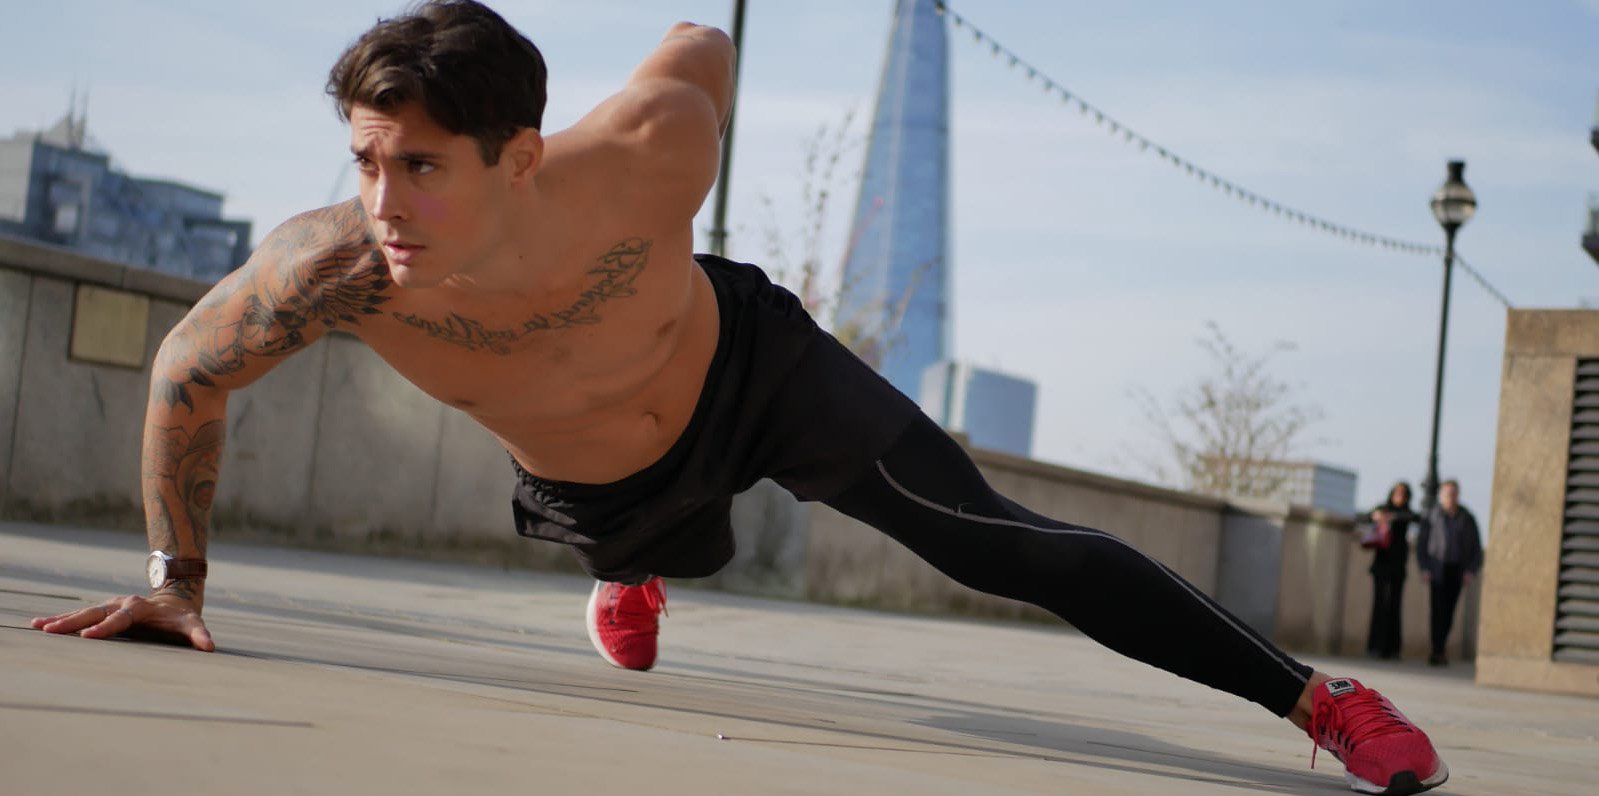 Interview: Dan Suarez, fitness expert and Equinox instructor, shares his routine with us